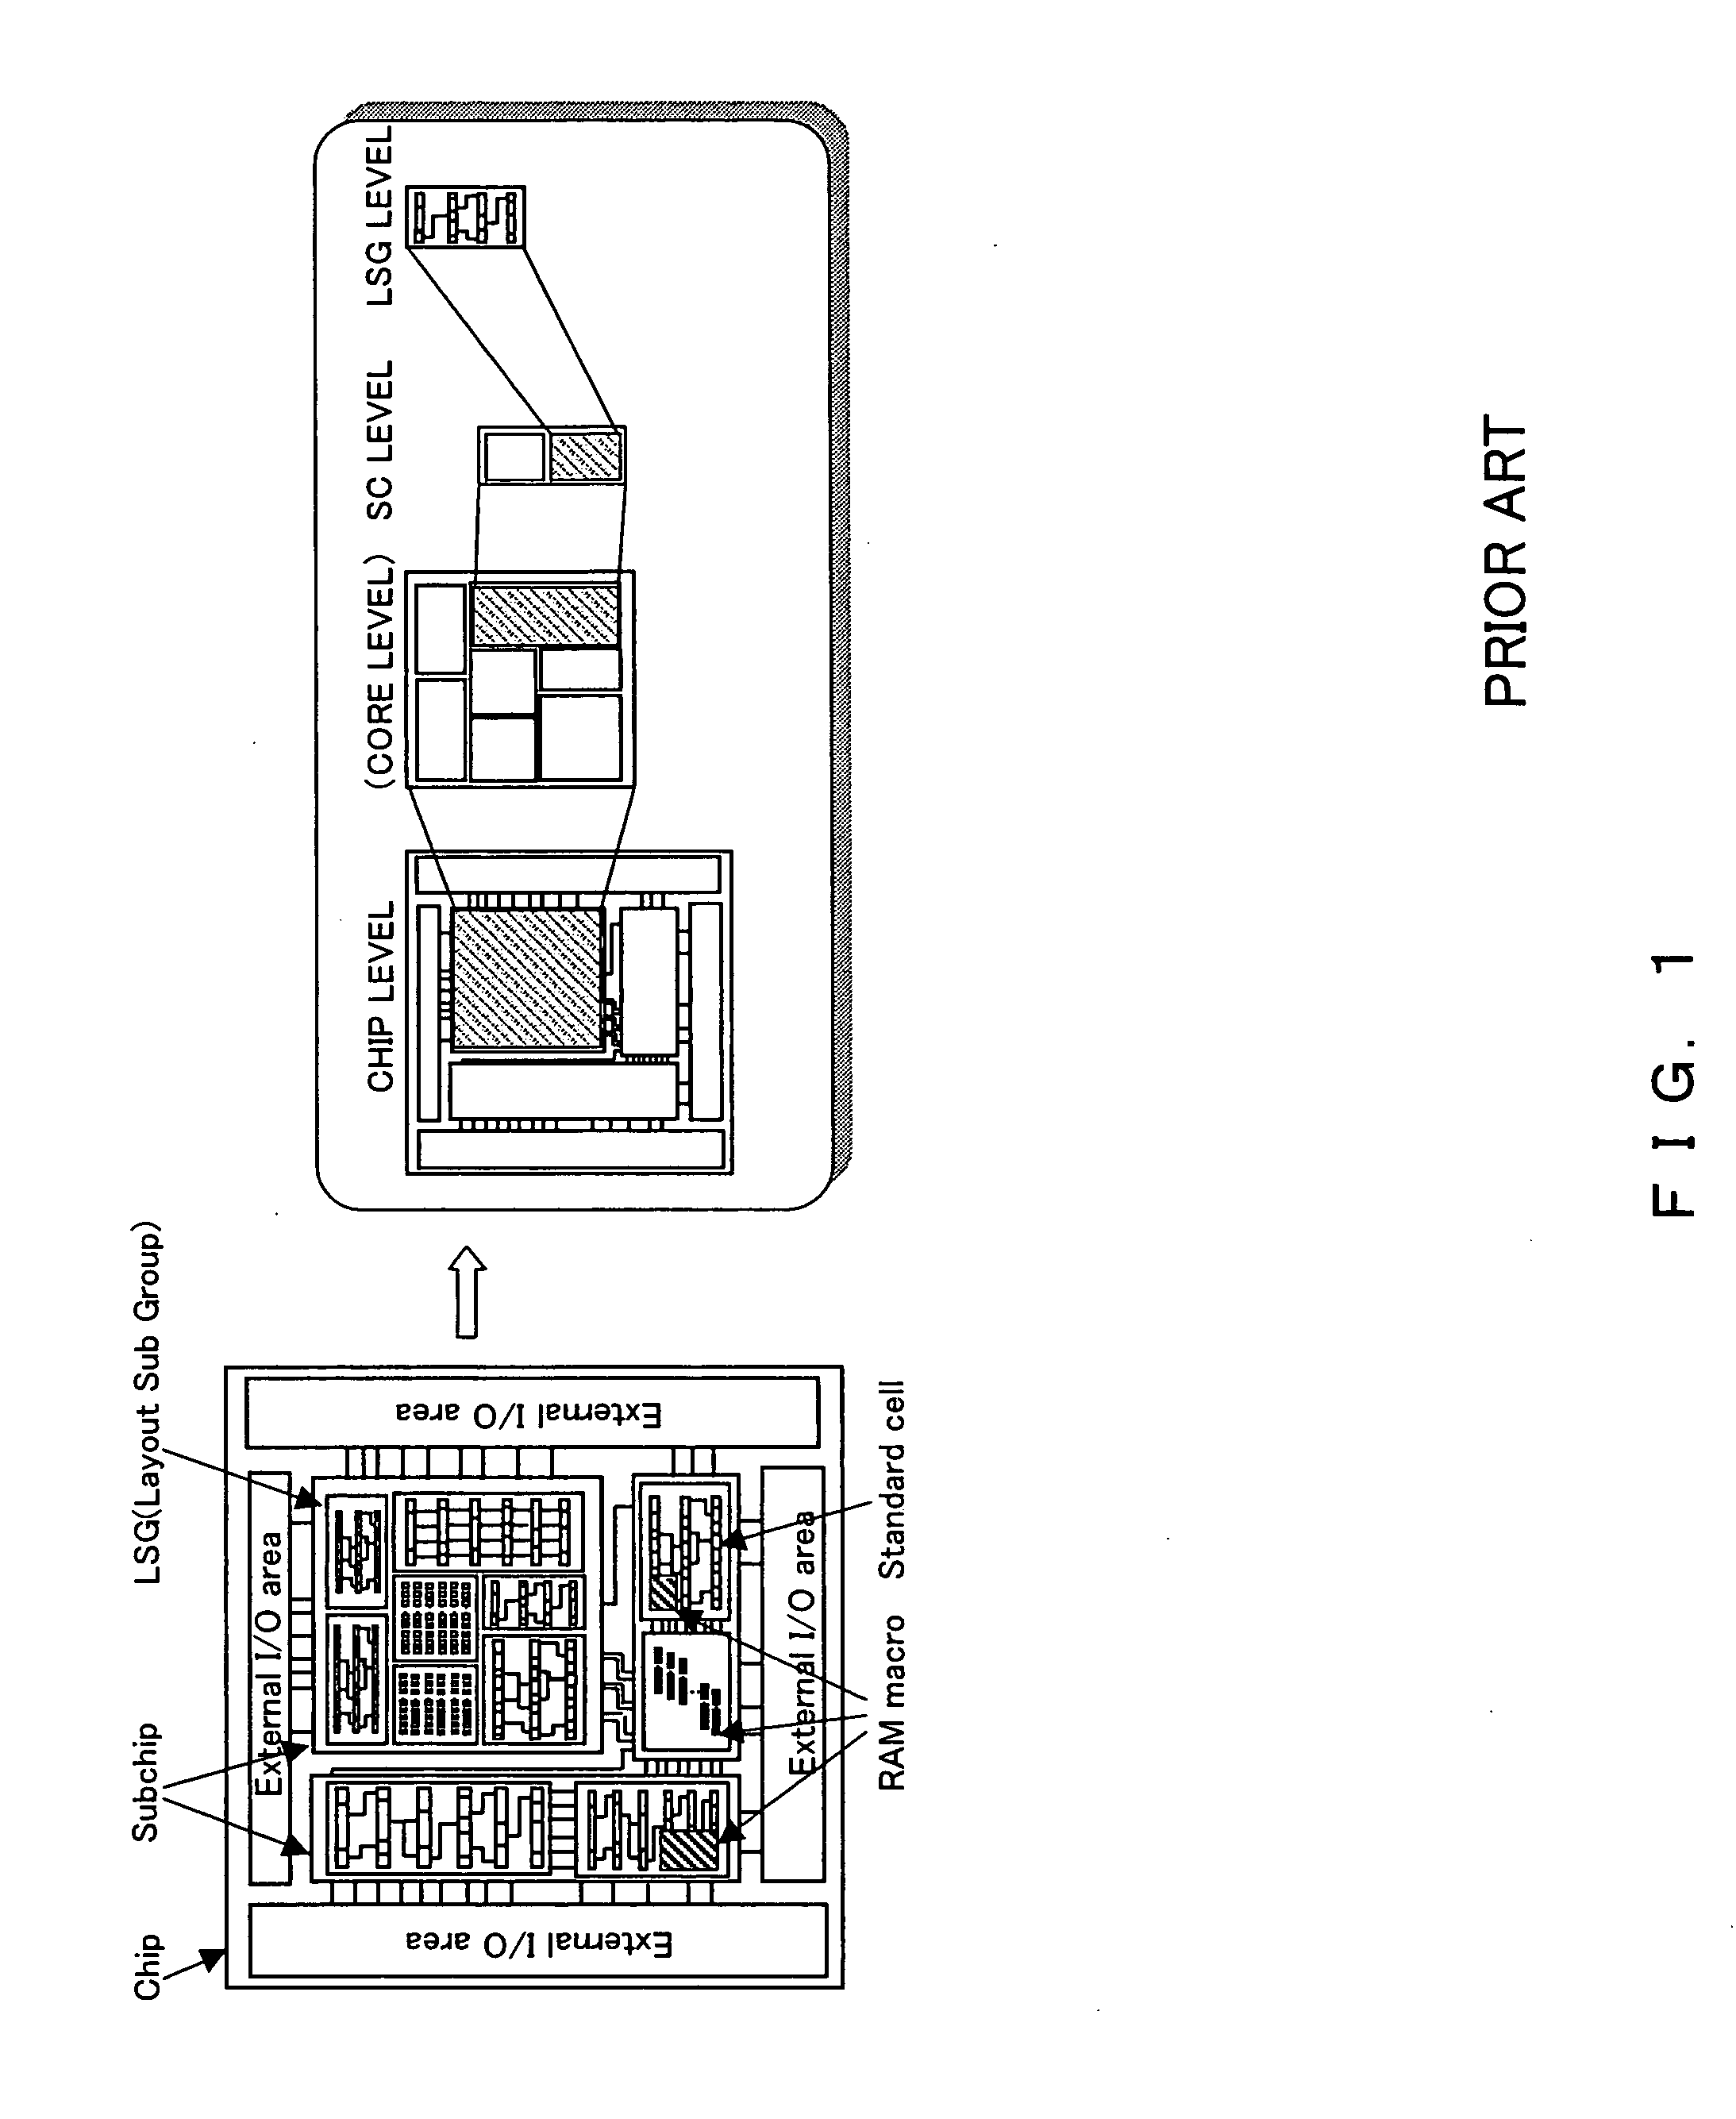 Method for the generation of static noise check data